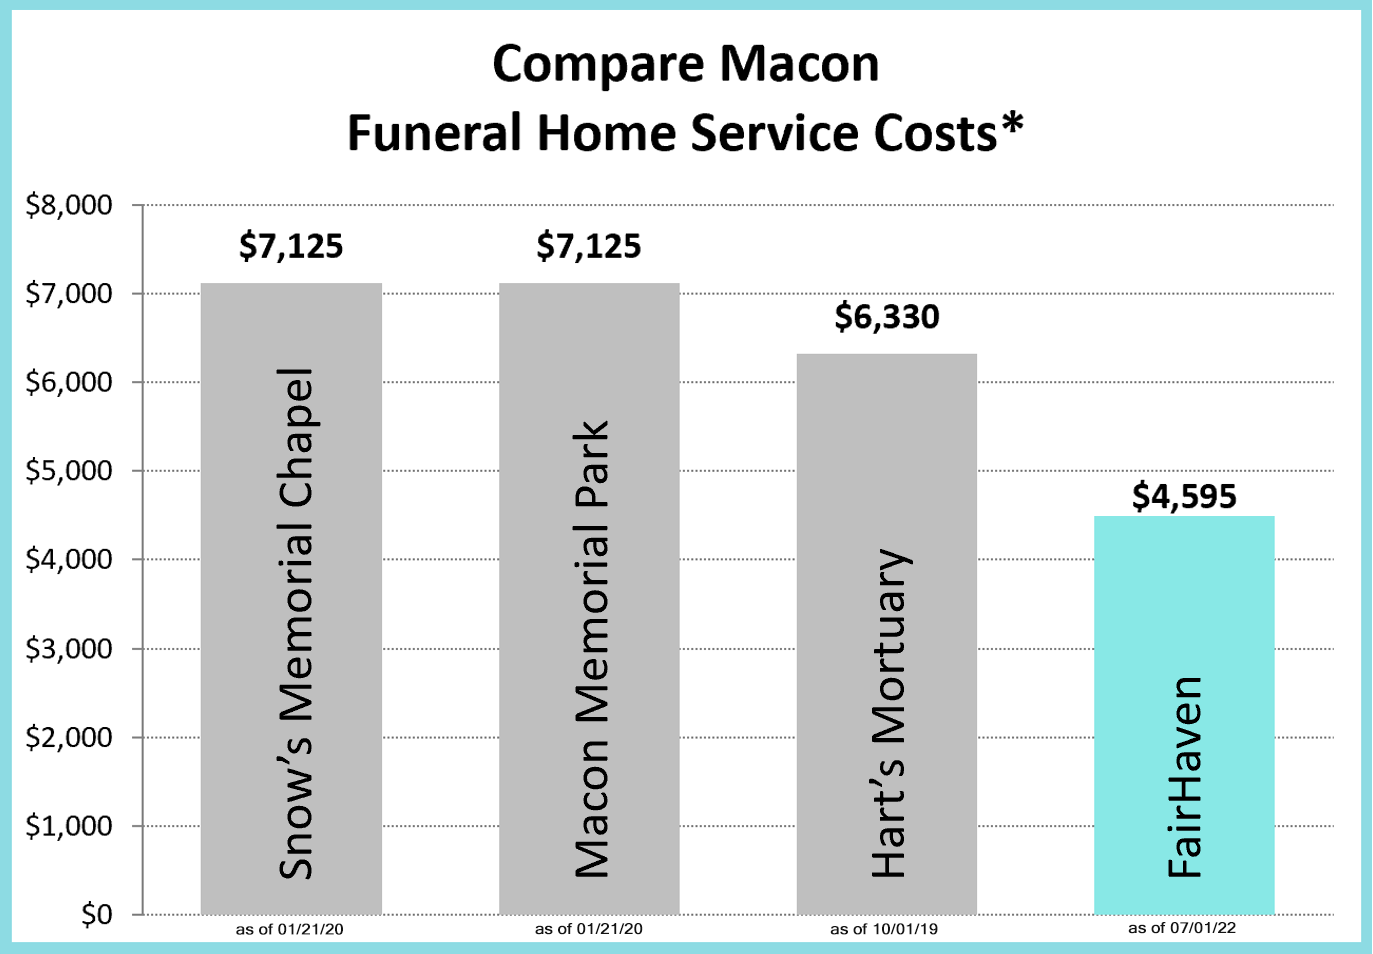 FairHaven Funeral Home Price Comparison Chart updated July 1, 2022